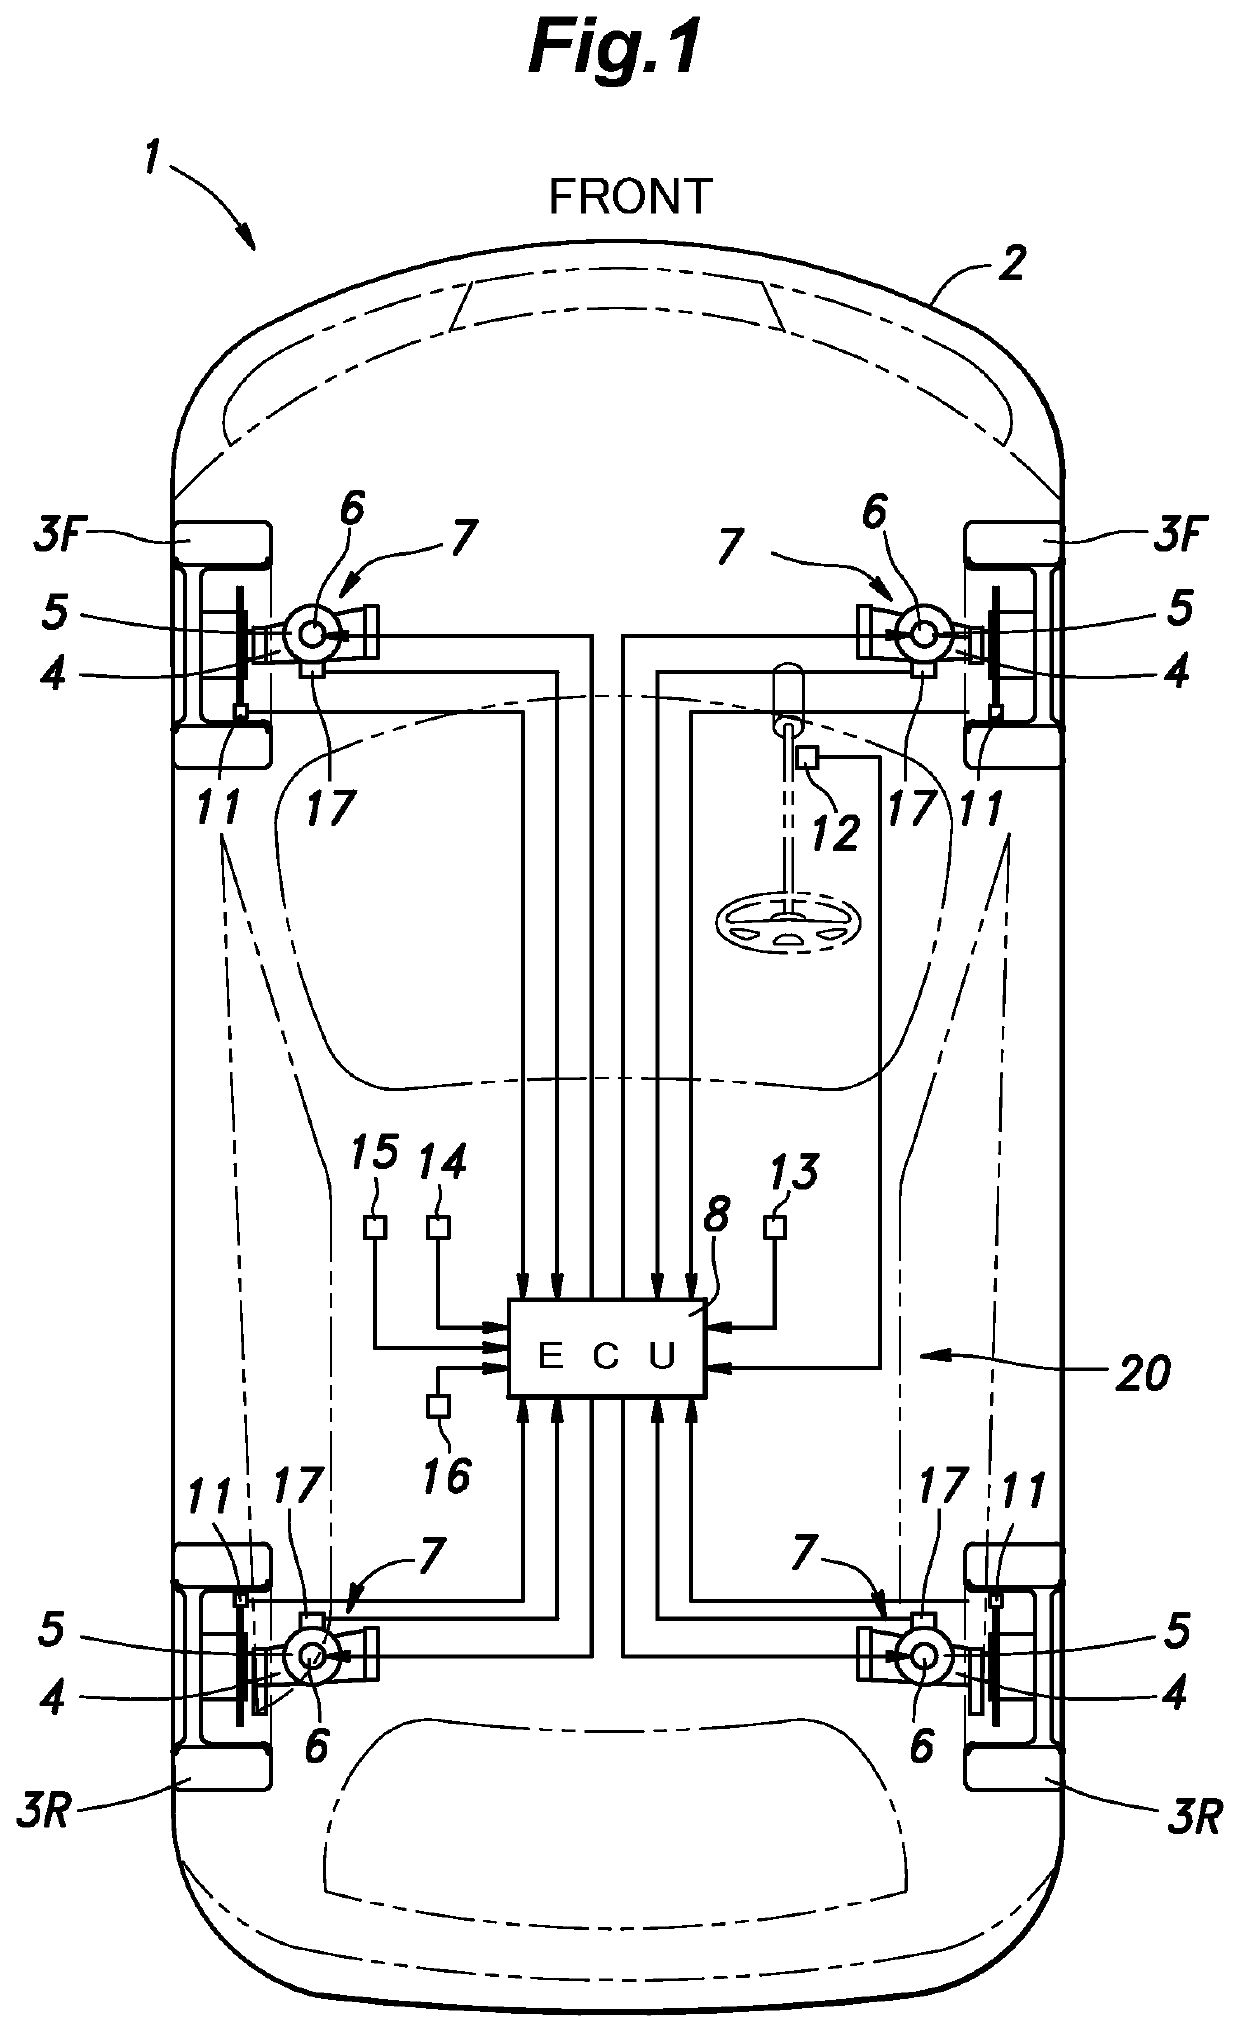 Control system for variable damping force damper